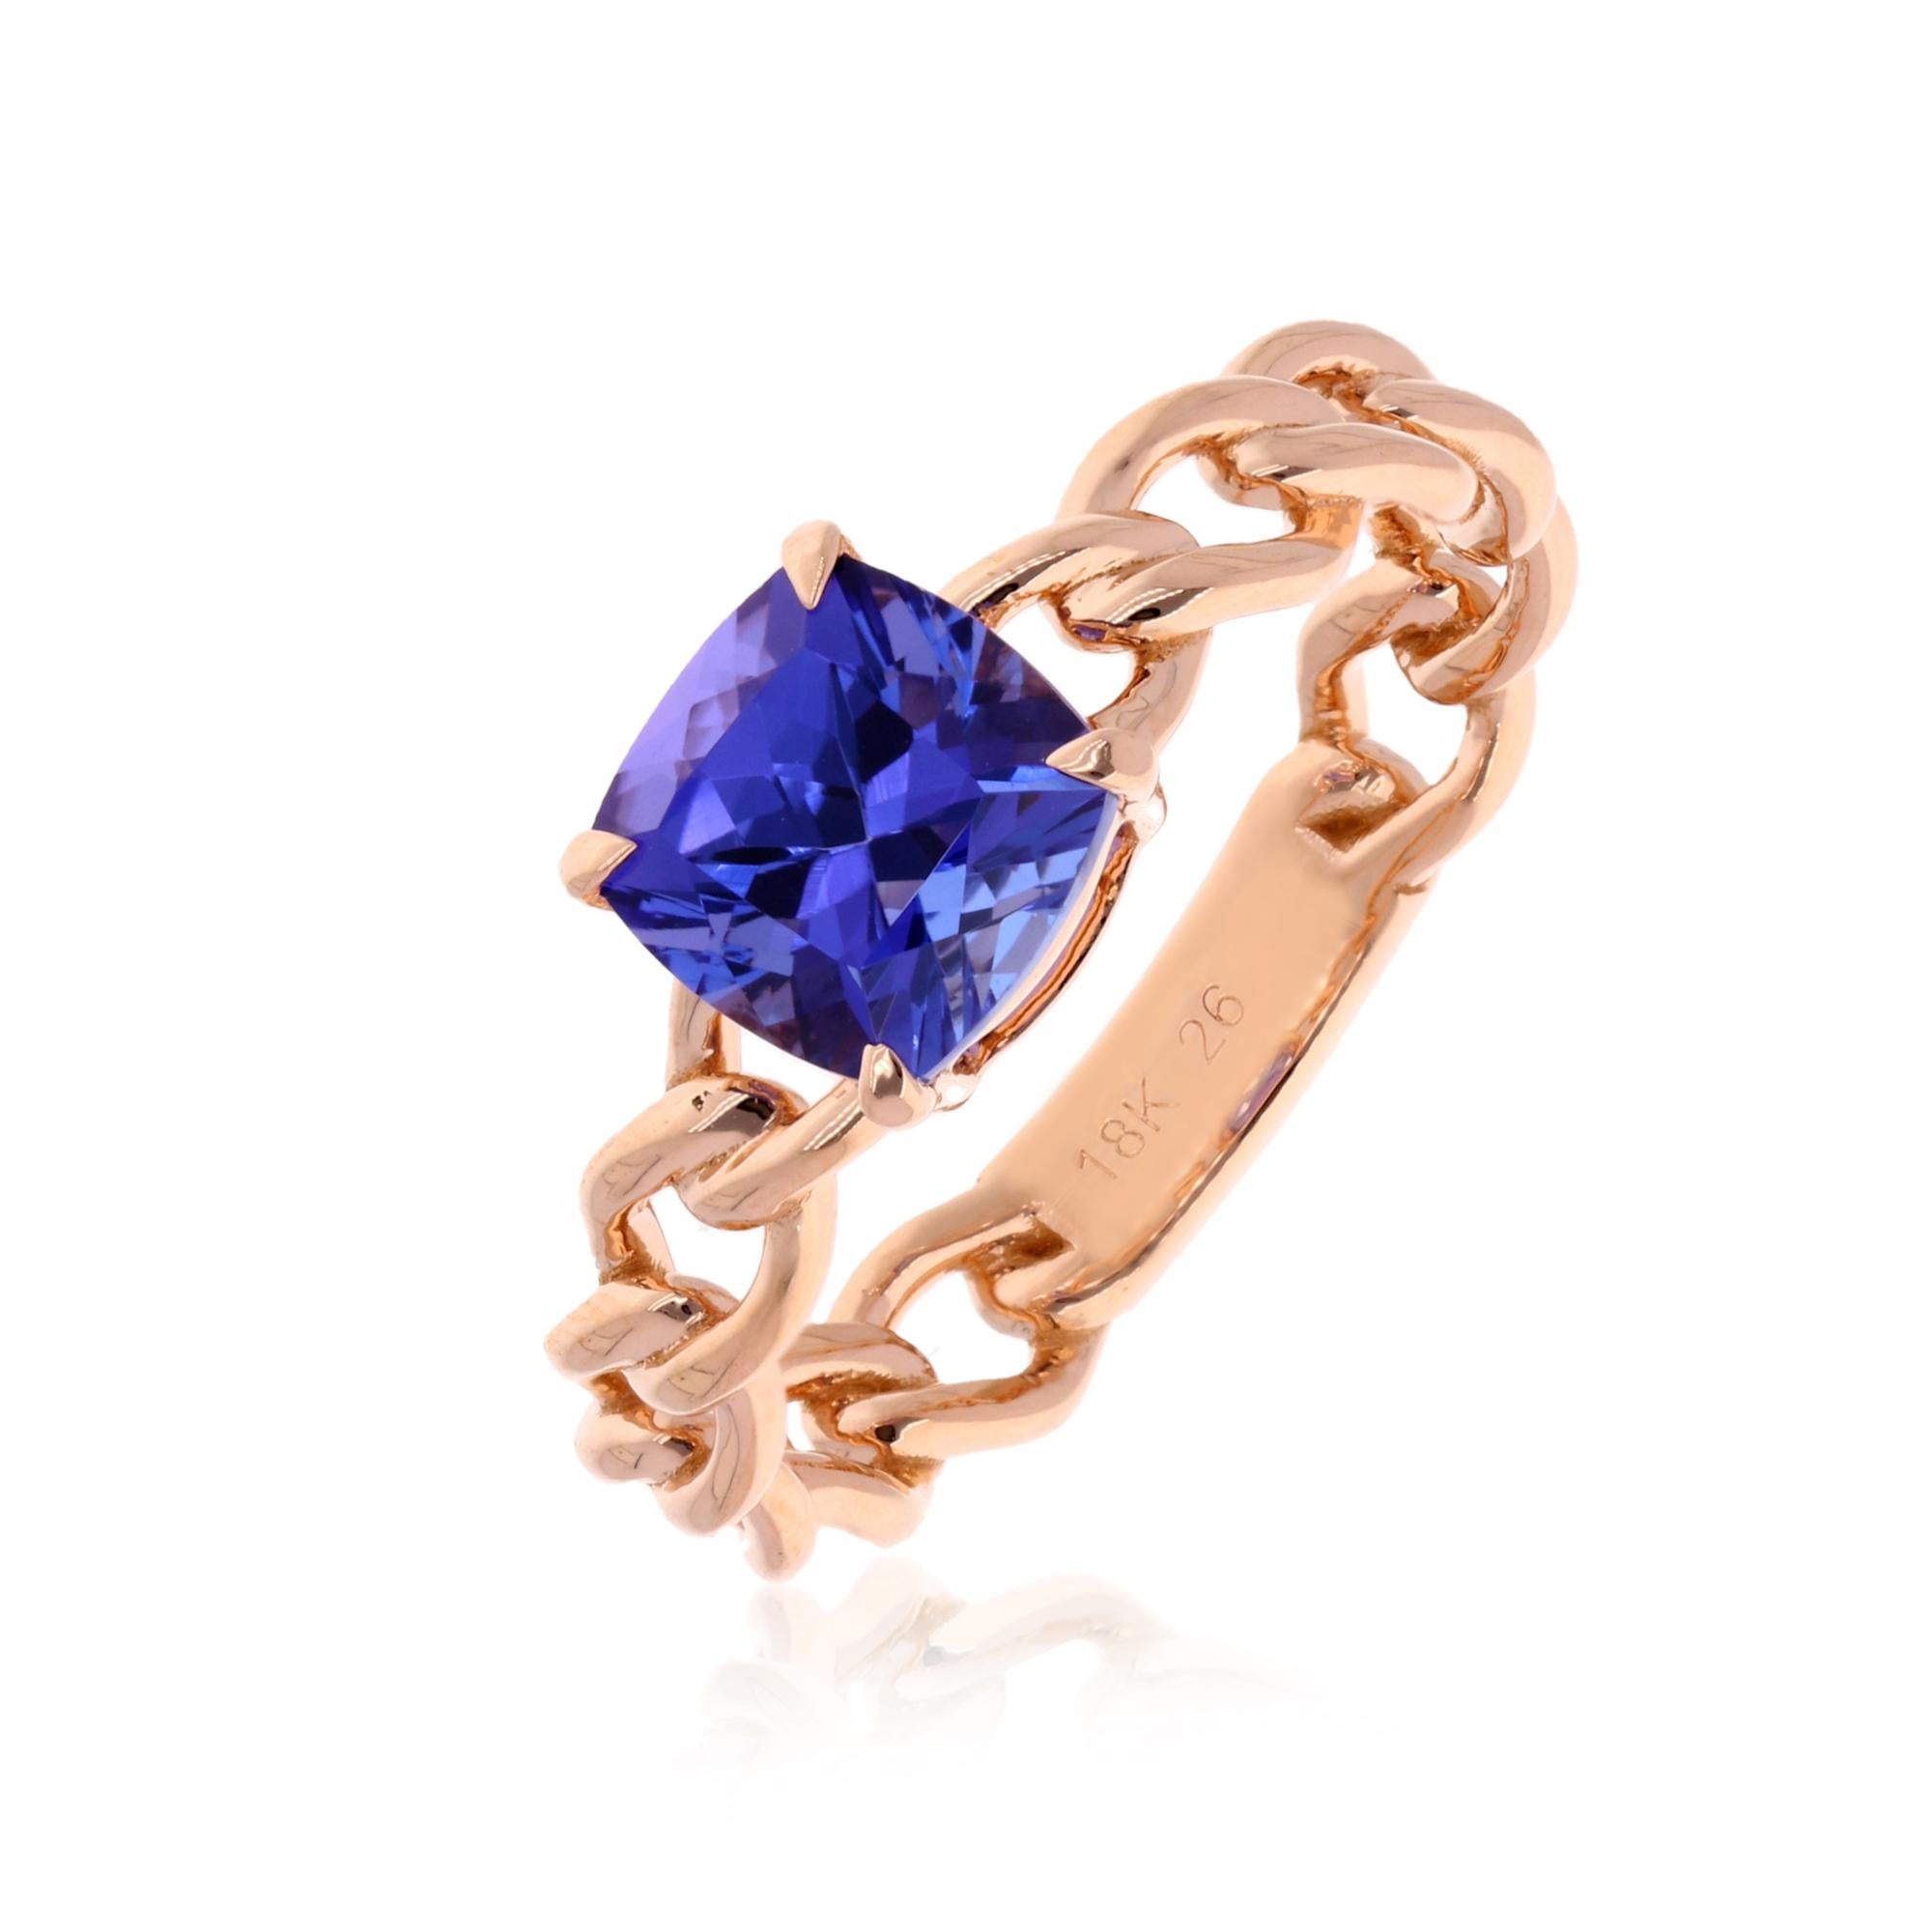 Item Code :- SER-22342
Gross Weight :- 4.14 grams
18k Rose Gold Weight :- 3.74 grams
Tanzanite Weight :- 1.98 Carat
Ring Size :- 7 US & All size available

✦ Sizing
.....................
We can adjust most items to fit your sizing preferences. Most